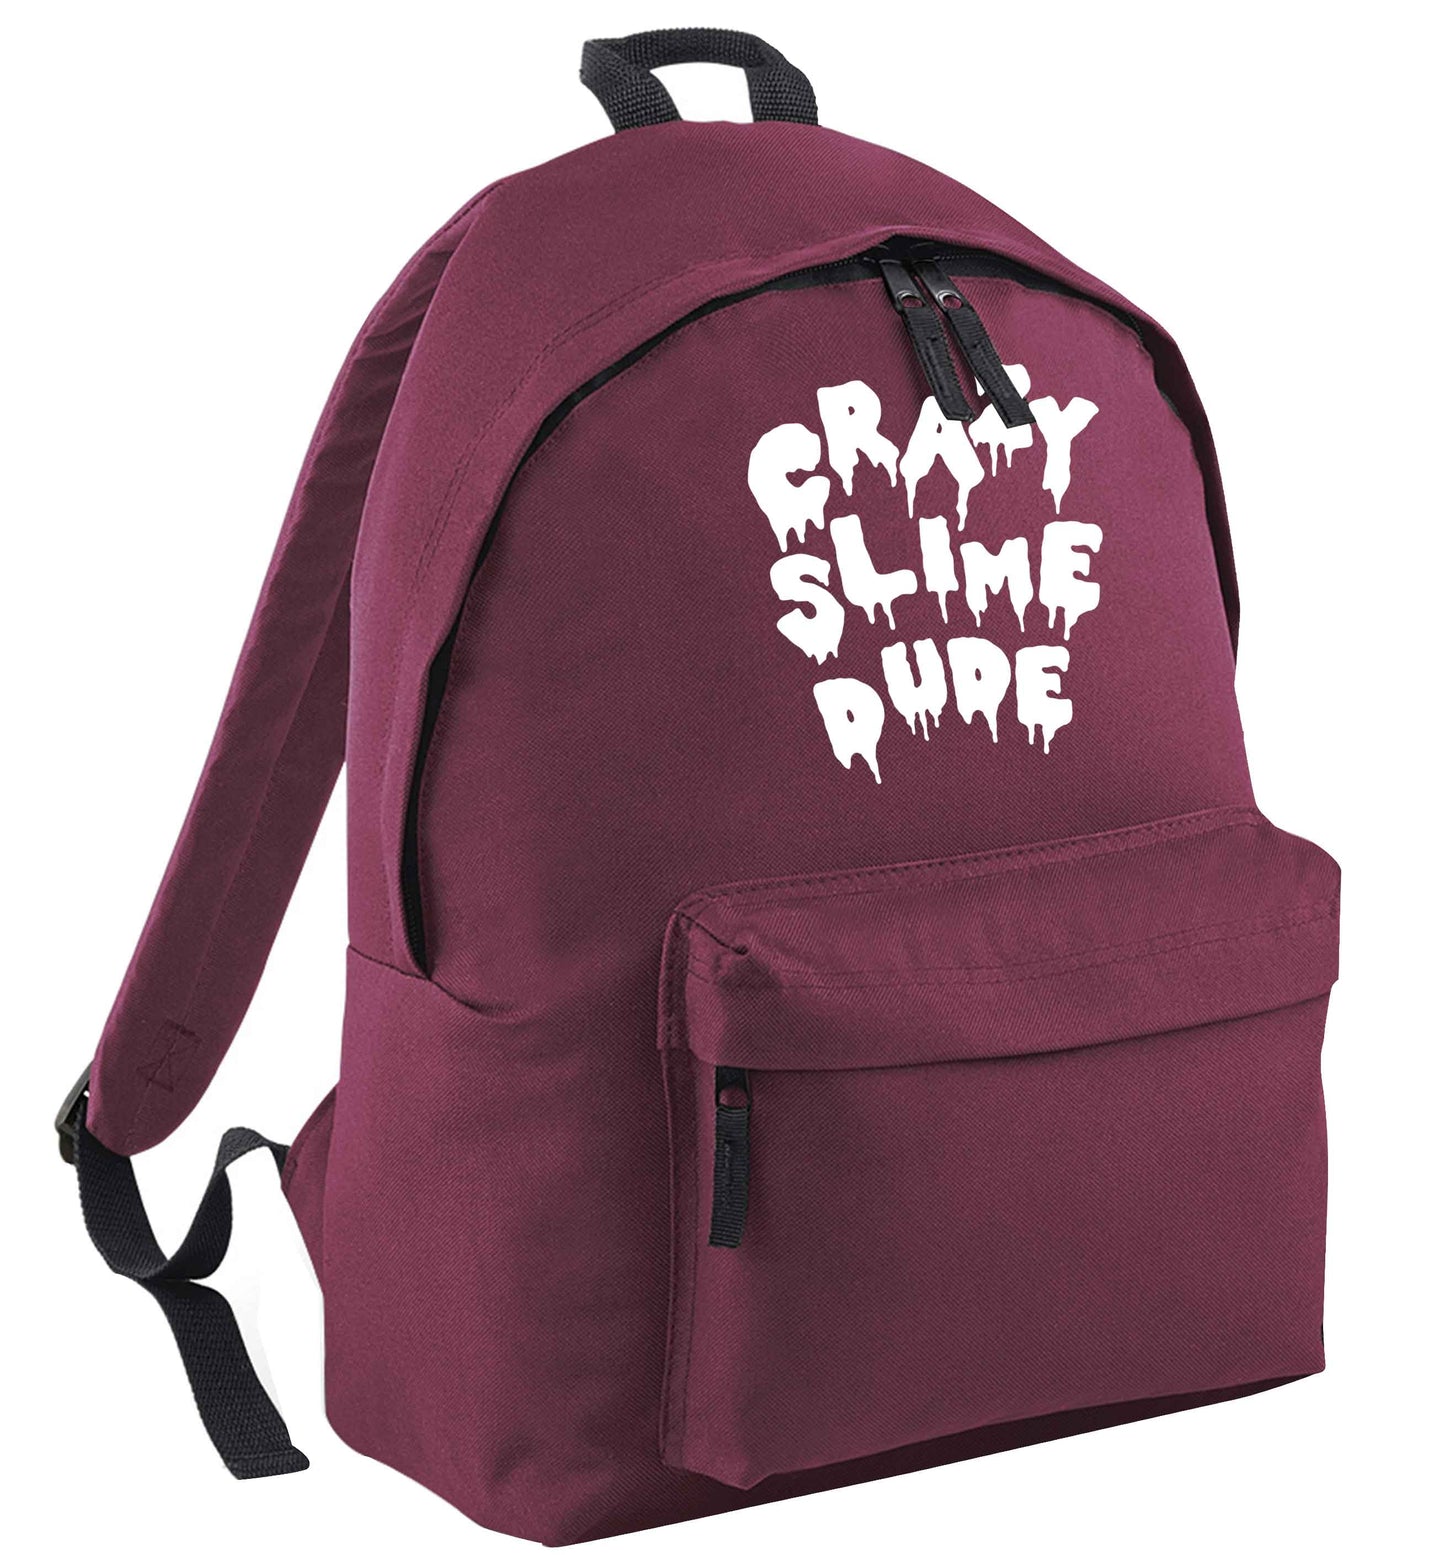 Crazy slime dude maroon adults backpack